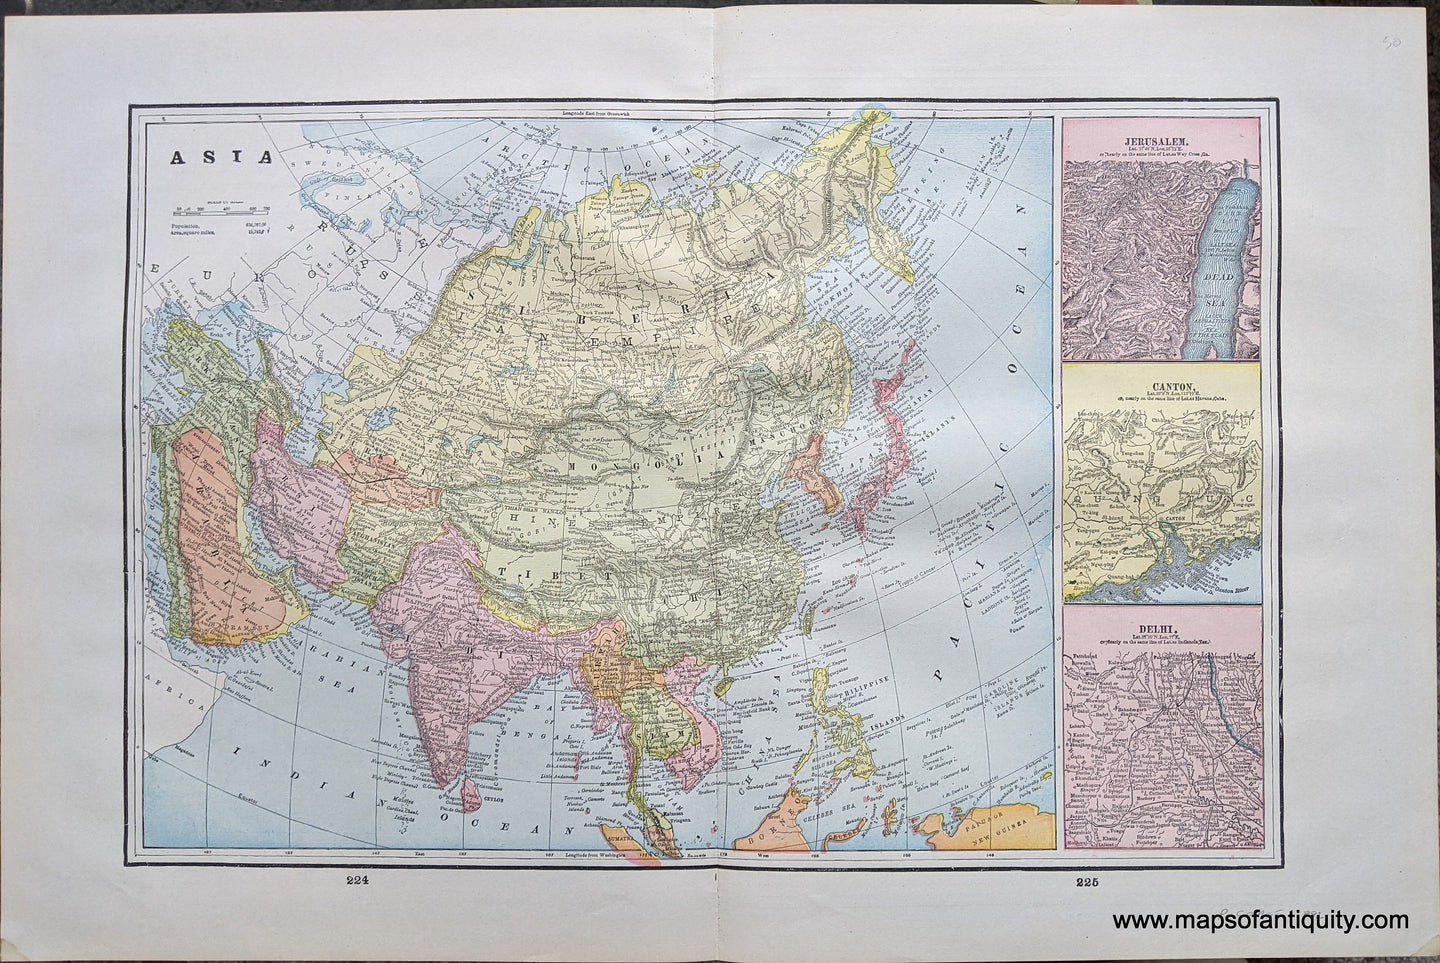 Genuine-Antique-Printed-Color-Comparative-Chart-Asia;-versos:-Principal-Cities-of-the-Old-World-Central-Asia-Asia--1892-Home-Library-&-Supply-Association-Maps-Of-Antiquity-1800s-19th-century